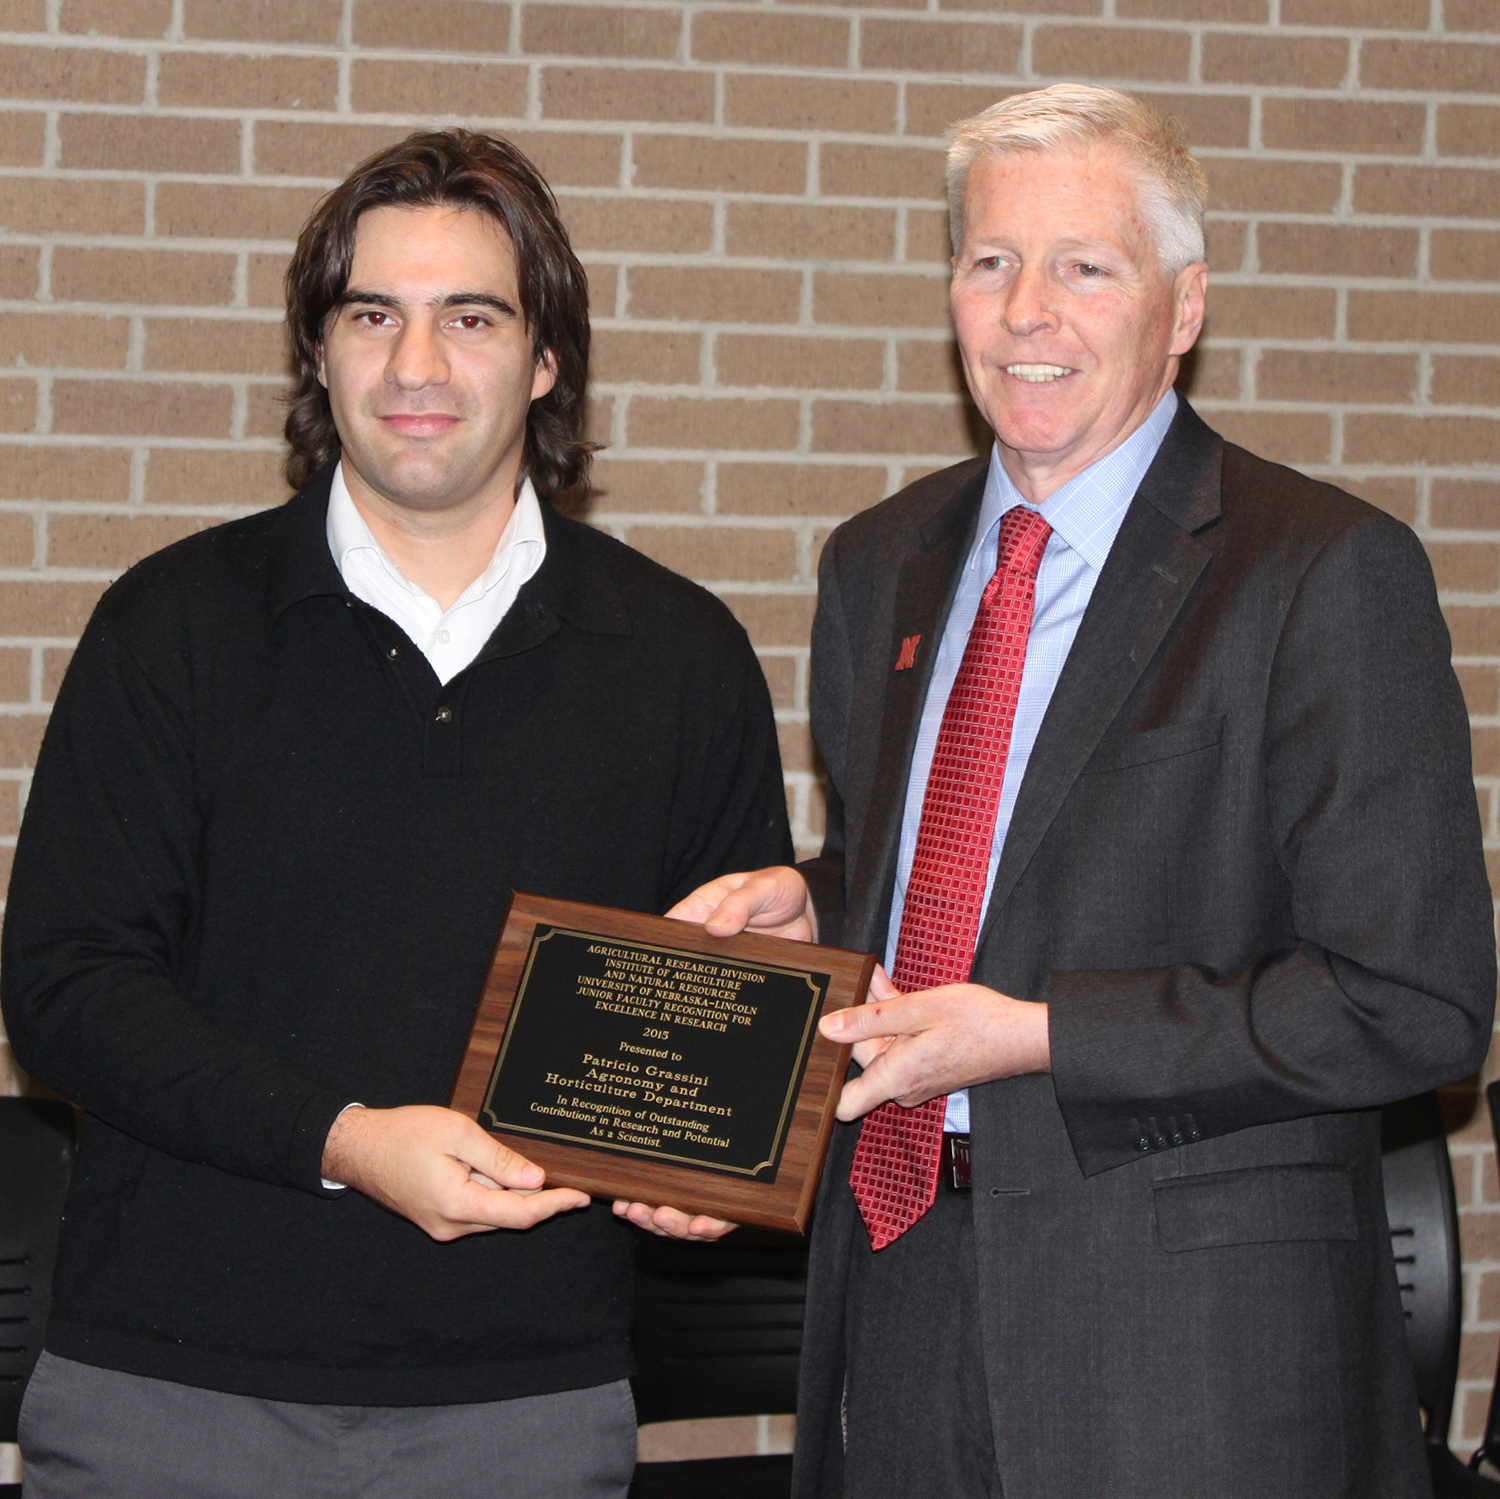 Grassini (left) honored with the Junior Faculty for Excellence in Research Award given by ARD Dean Archie Clutter.